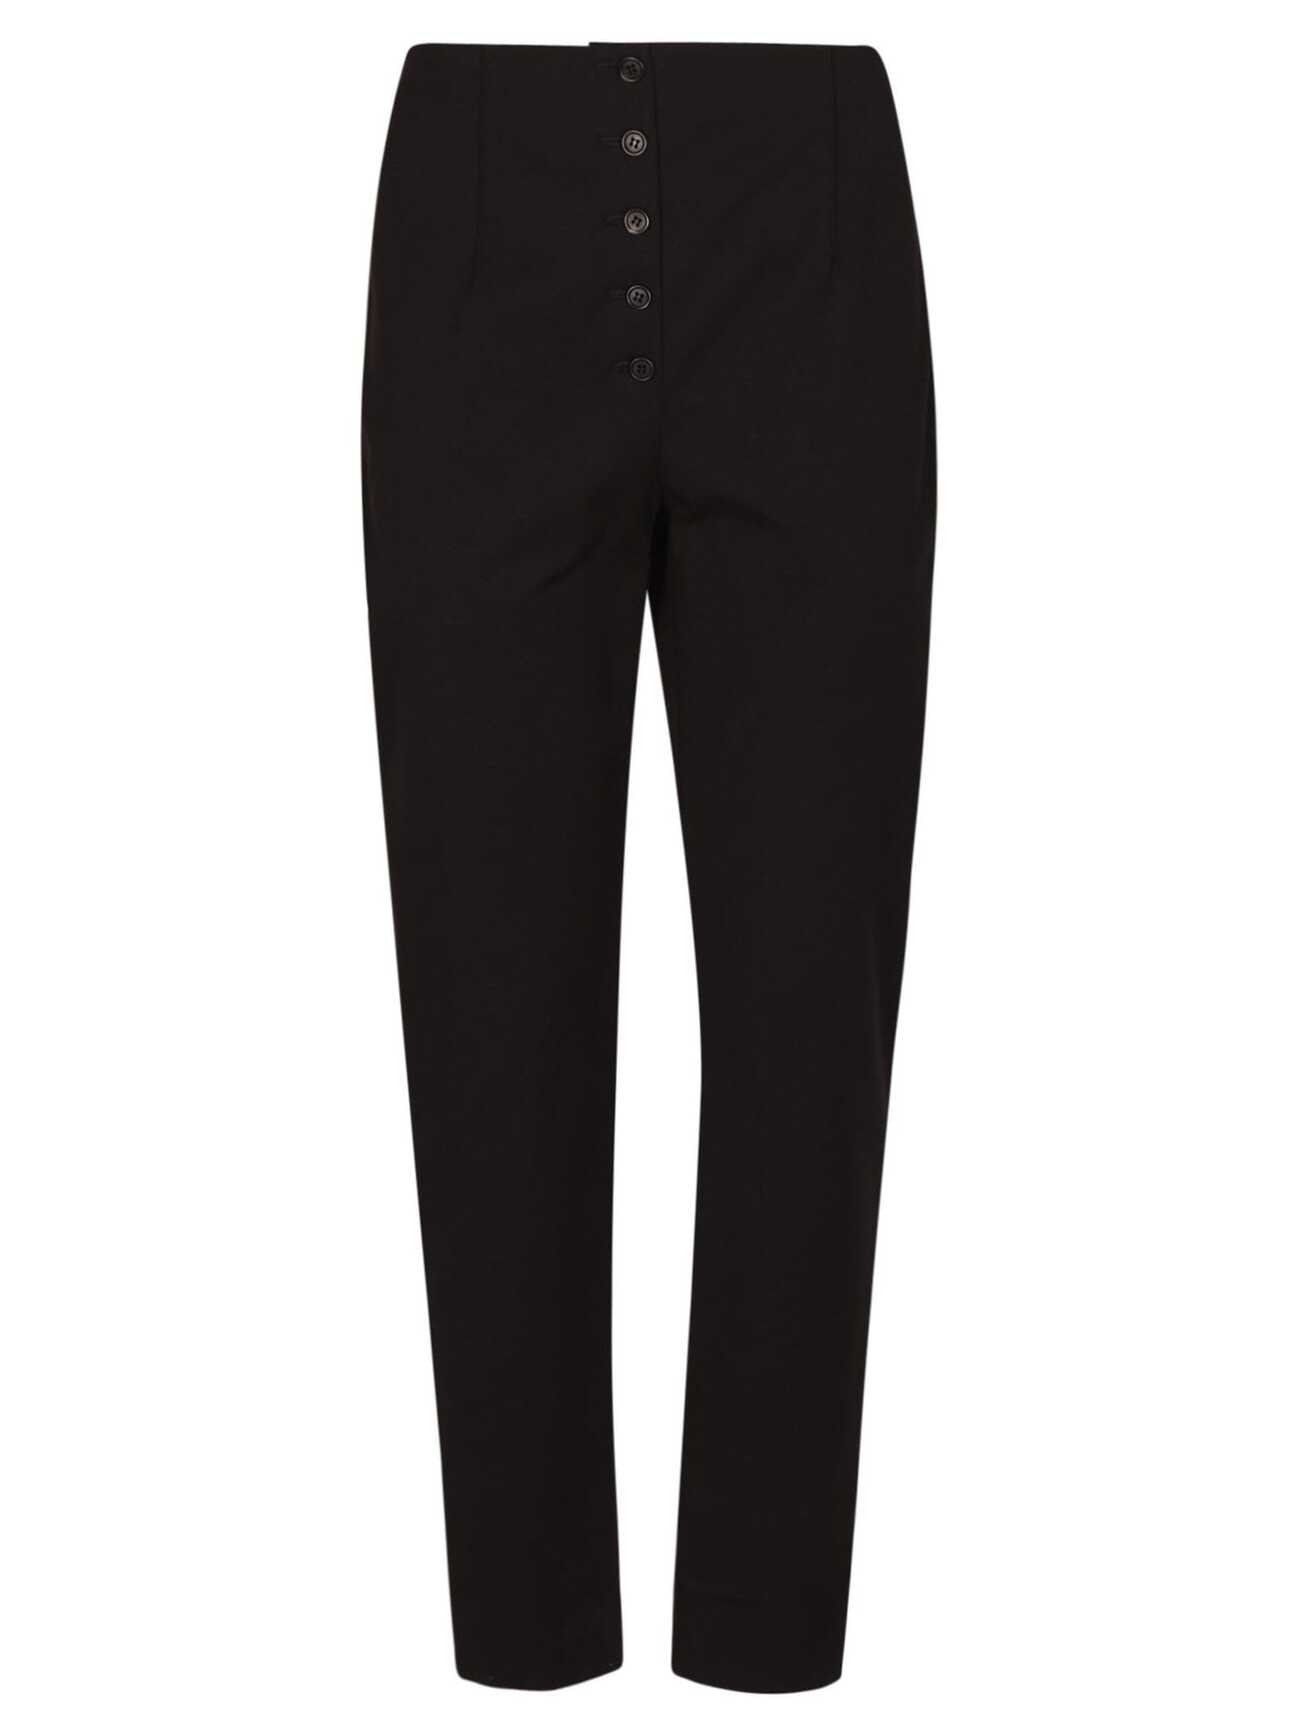 Philosophy di Lorenzo Serafini Buttoned Front Cropped Plain Trousers in black